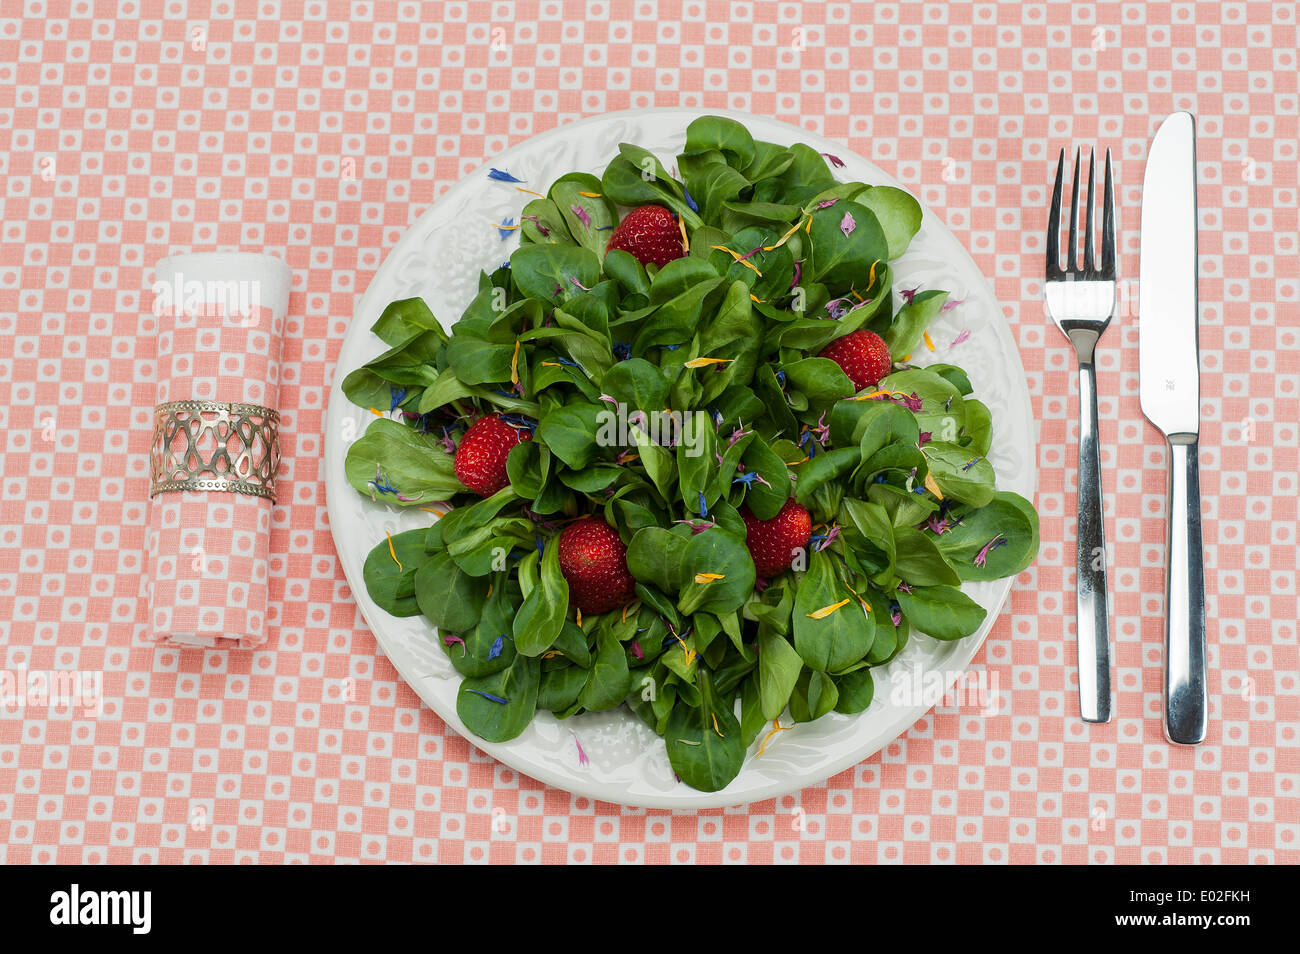 Lamb's lettuce with strawberries and flower petals served on a plate, napkin, cutlery Stock Photo